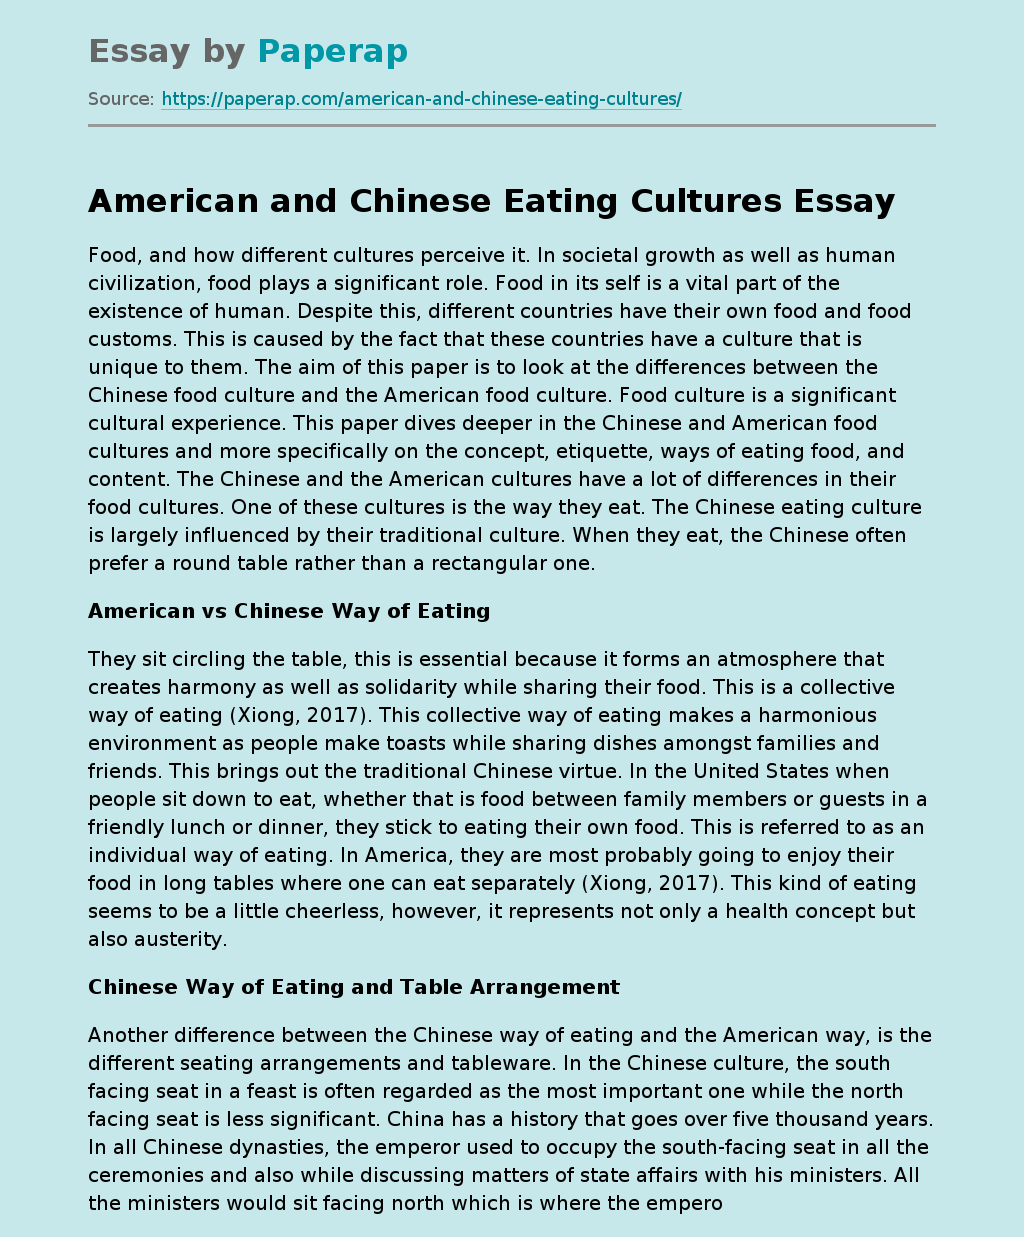 American and Chinese Eating Cultures